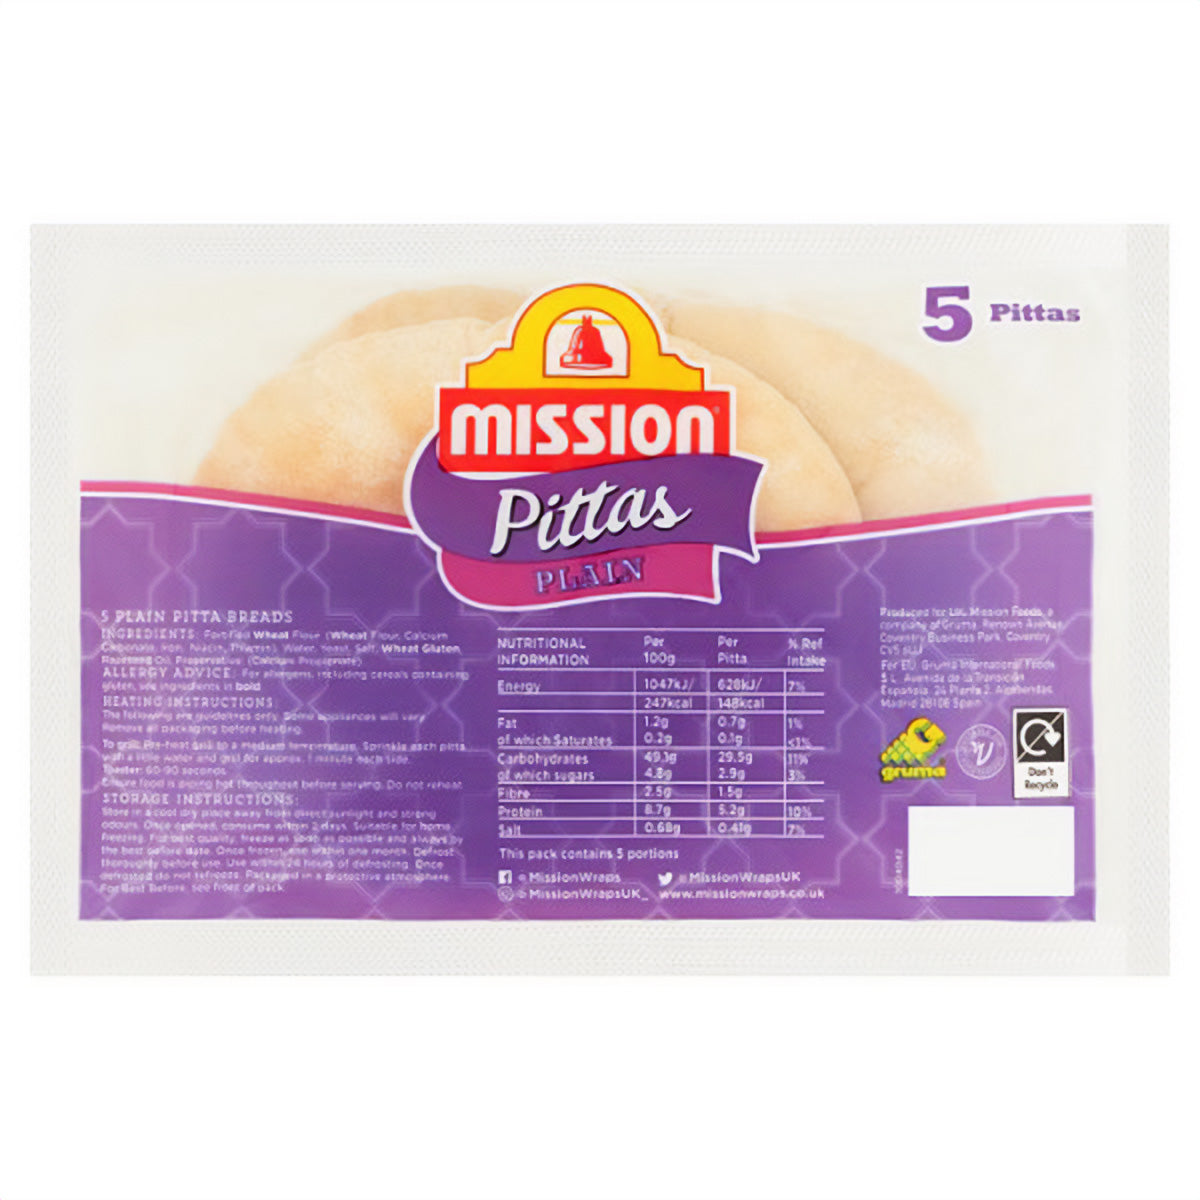 Mission - Plain Pitta Bread - 5 Pack in a plastic bag.